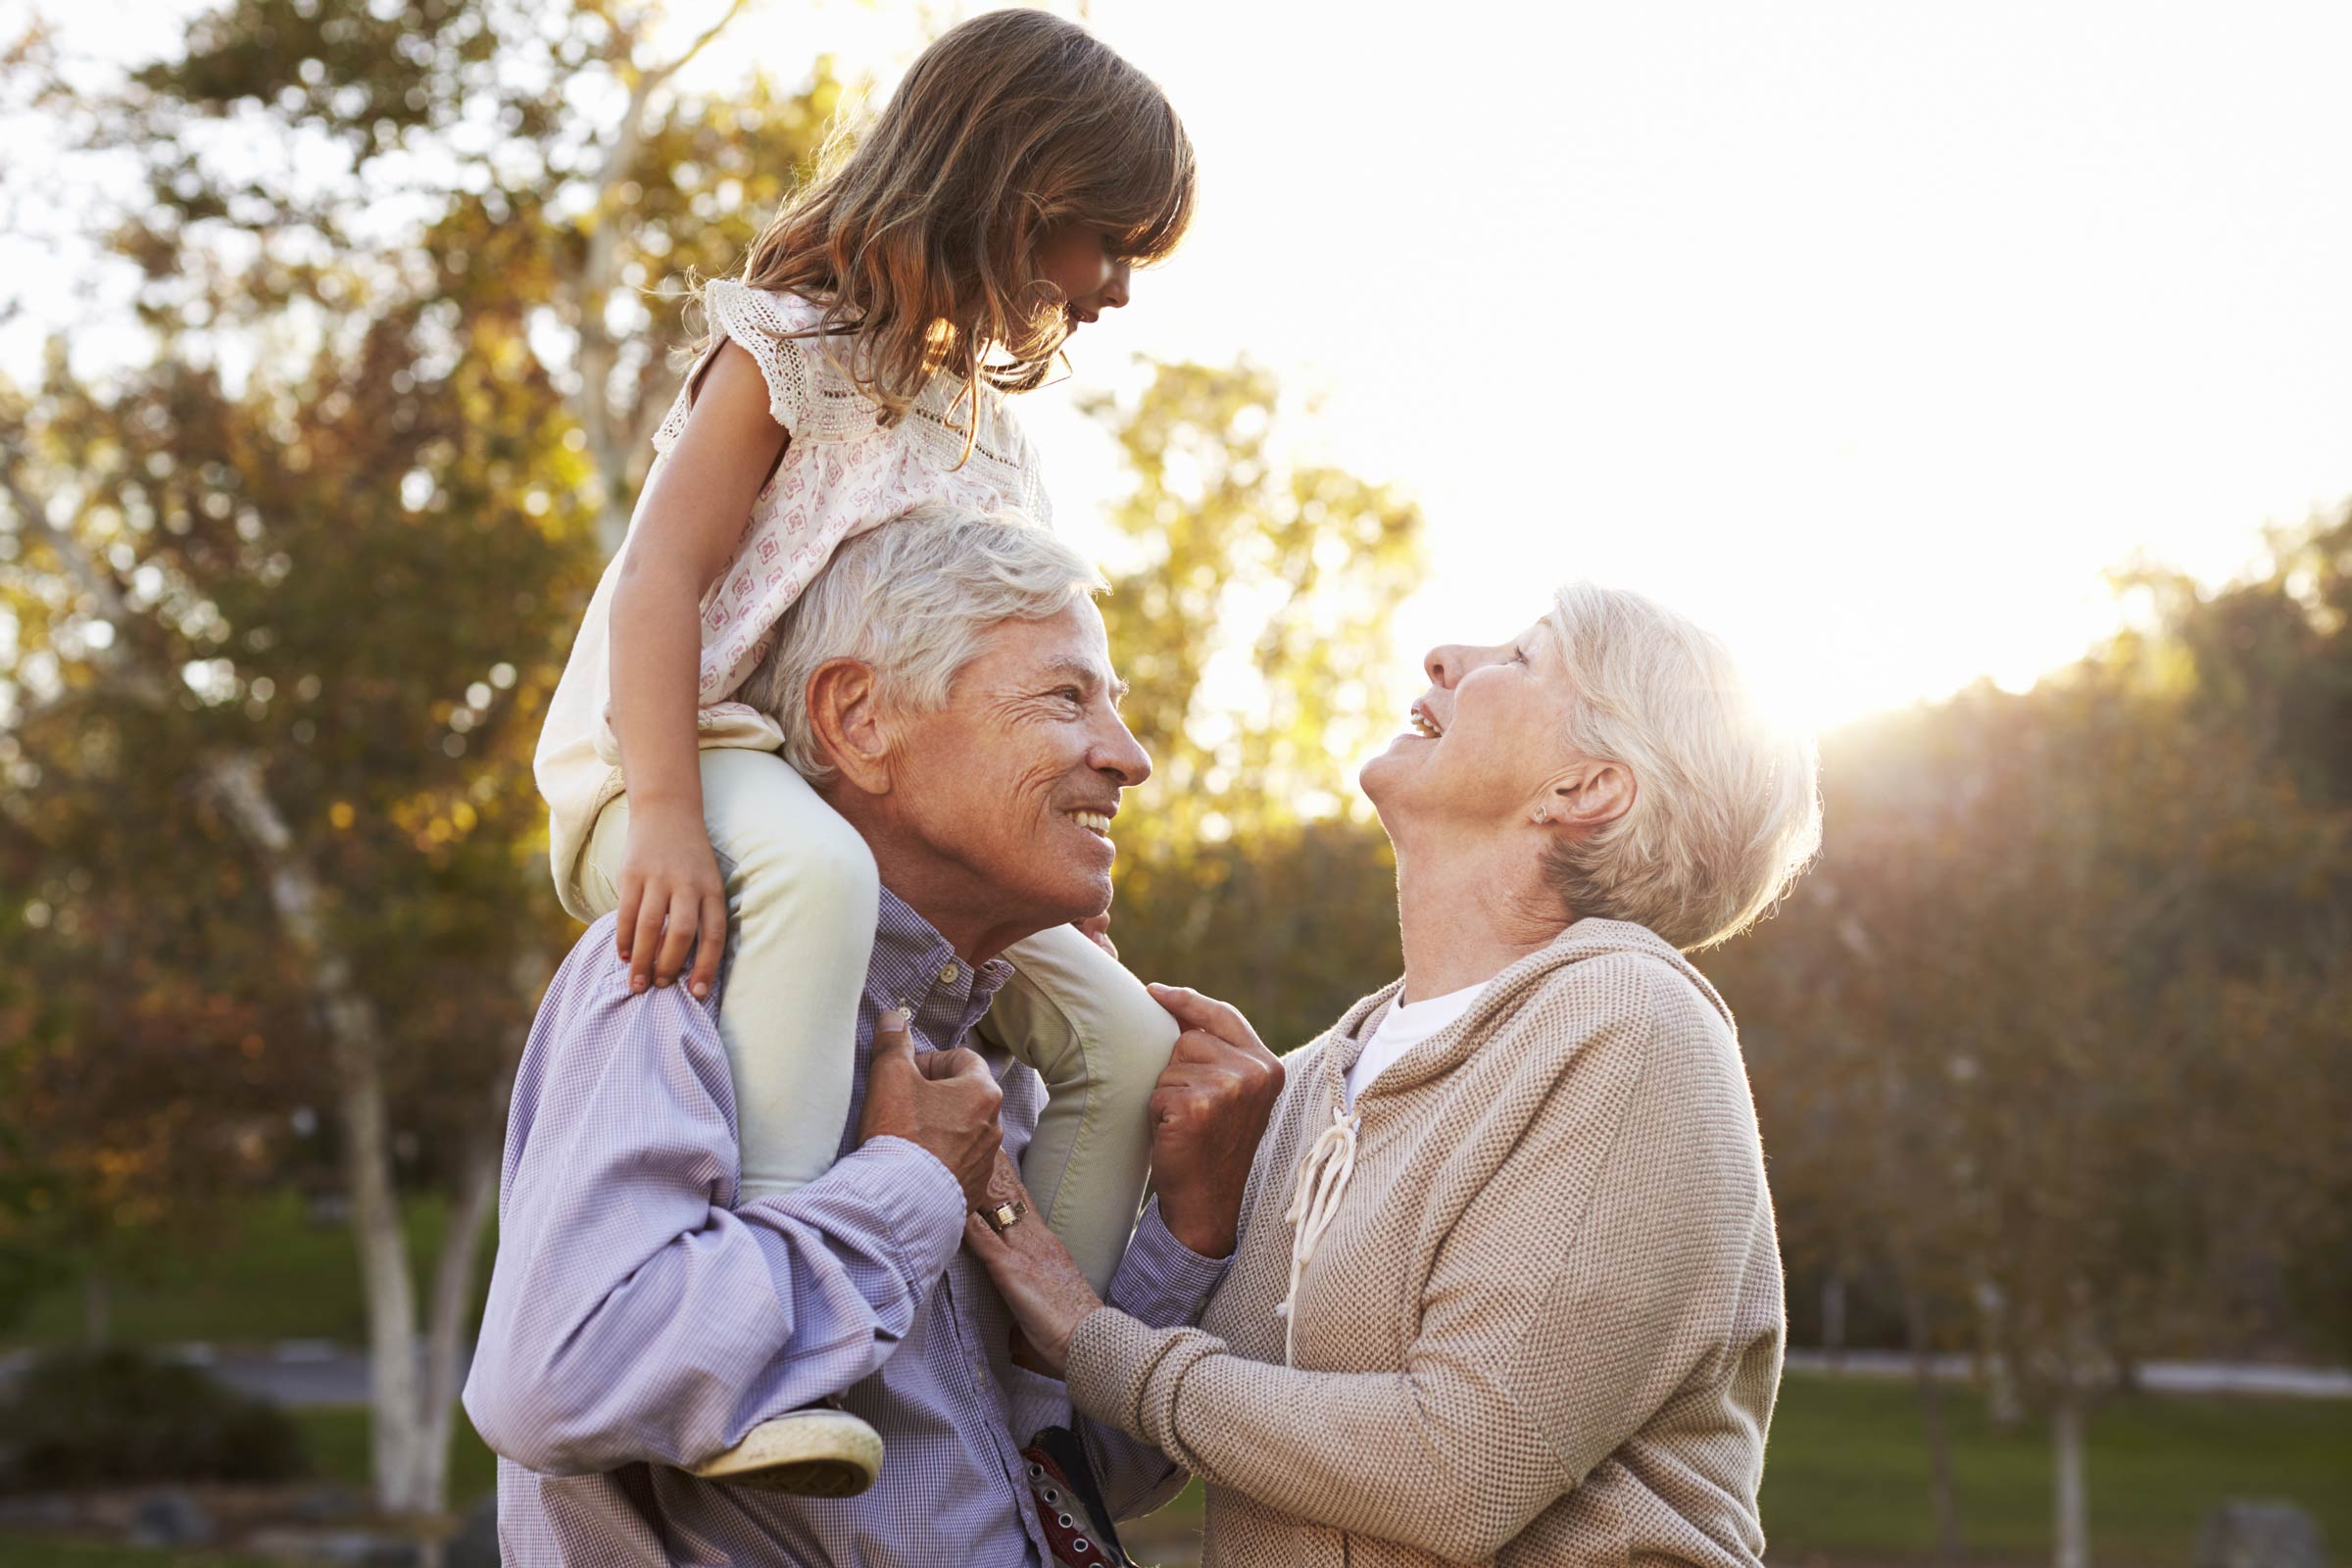 Grandparents’ legal rights: How to stay connected with your grandkids after a family split